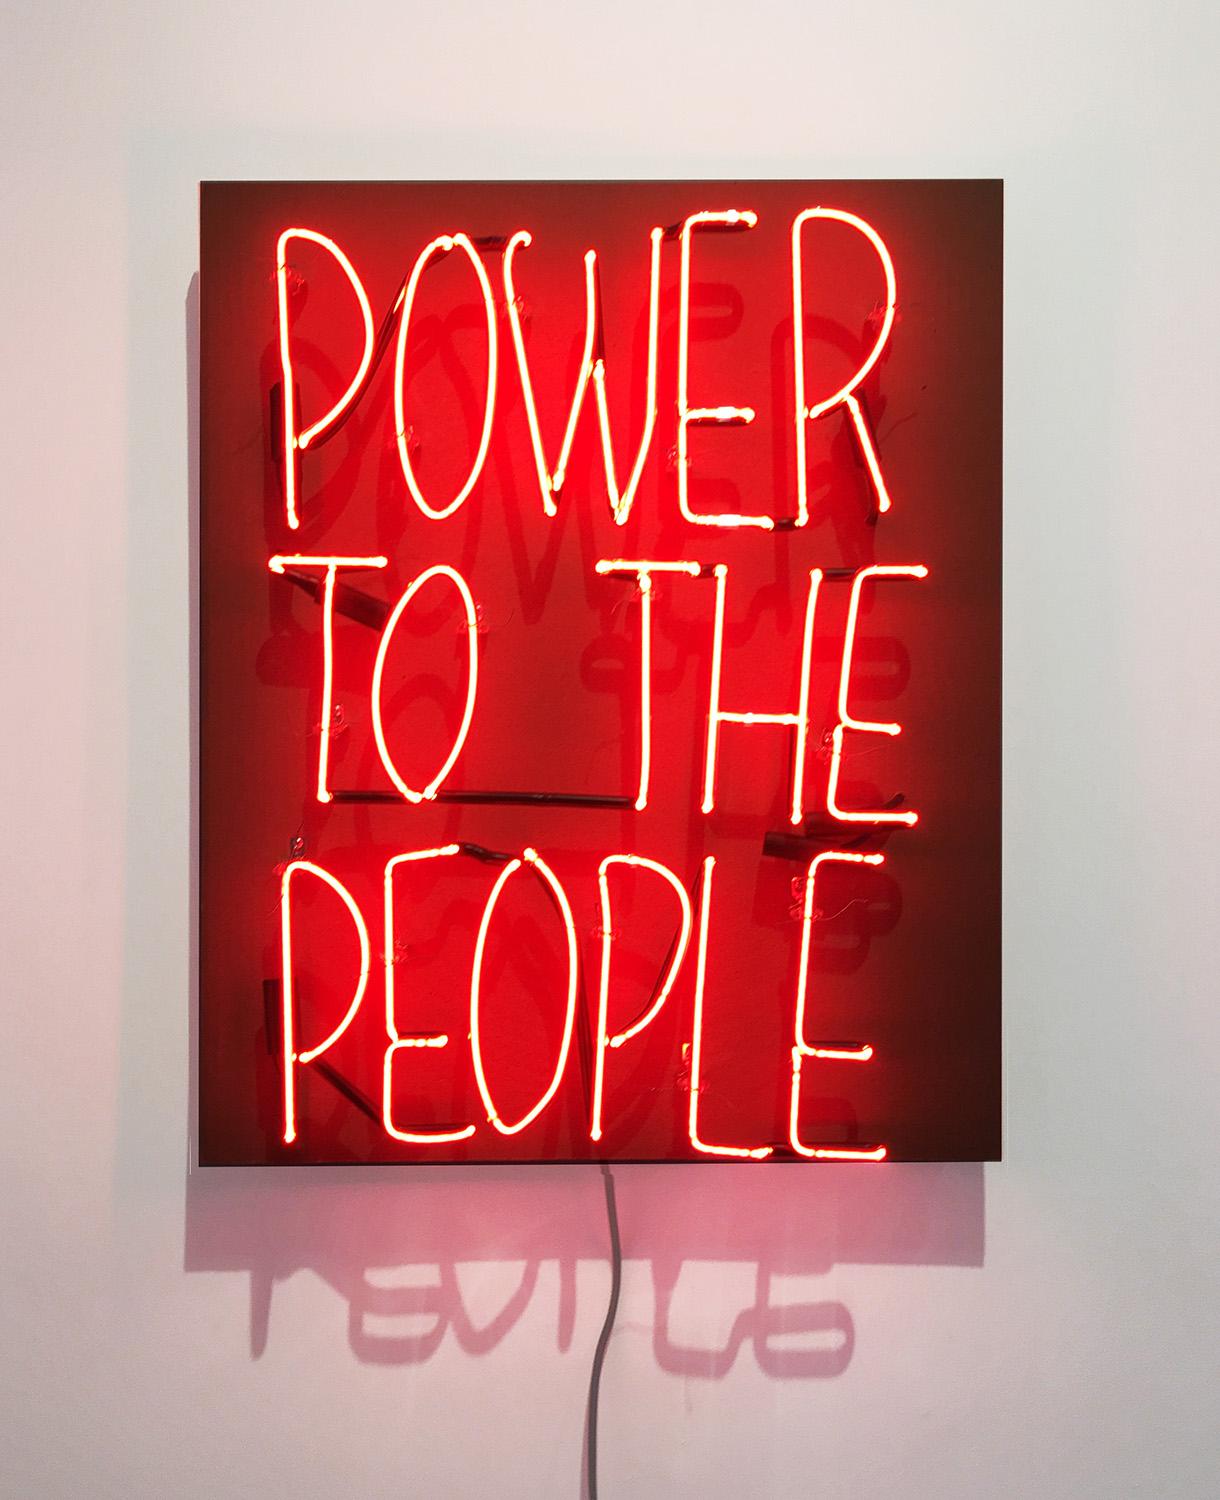 "Power To The People" Marsha P. Johnson Neon Sculpture - Mixed Media Art by Nelson Santos